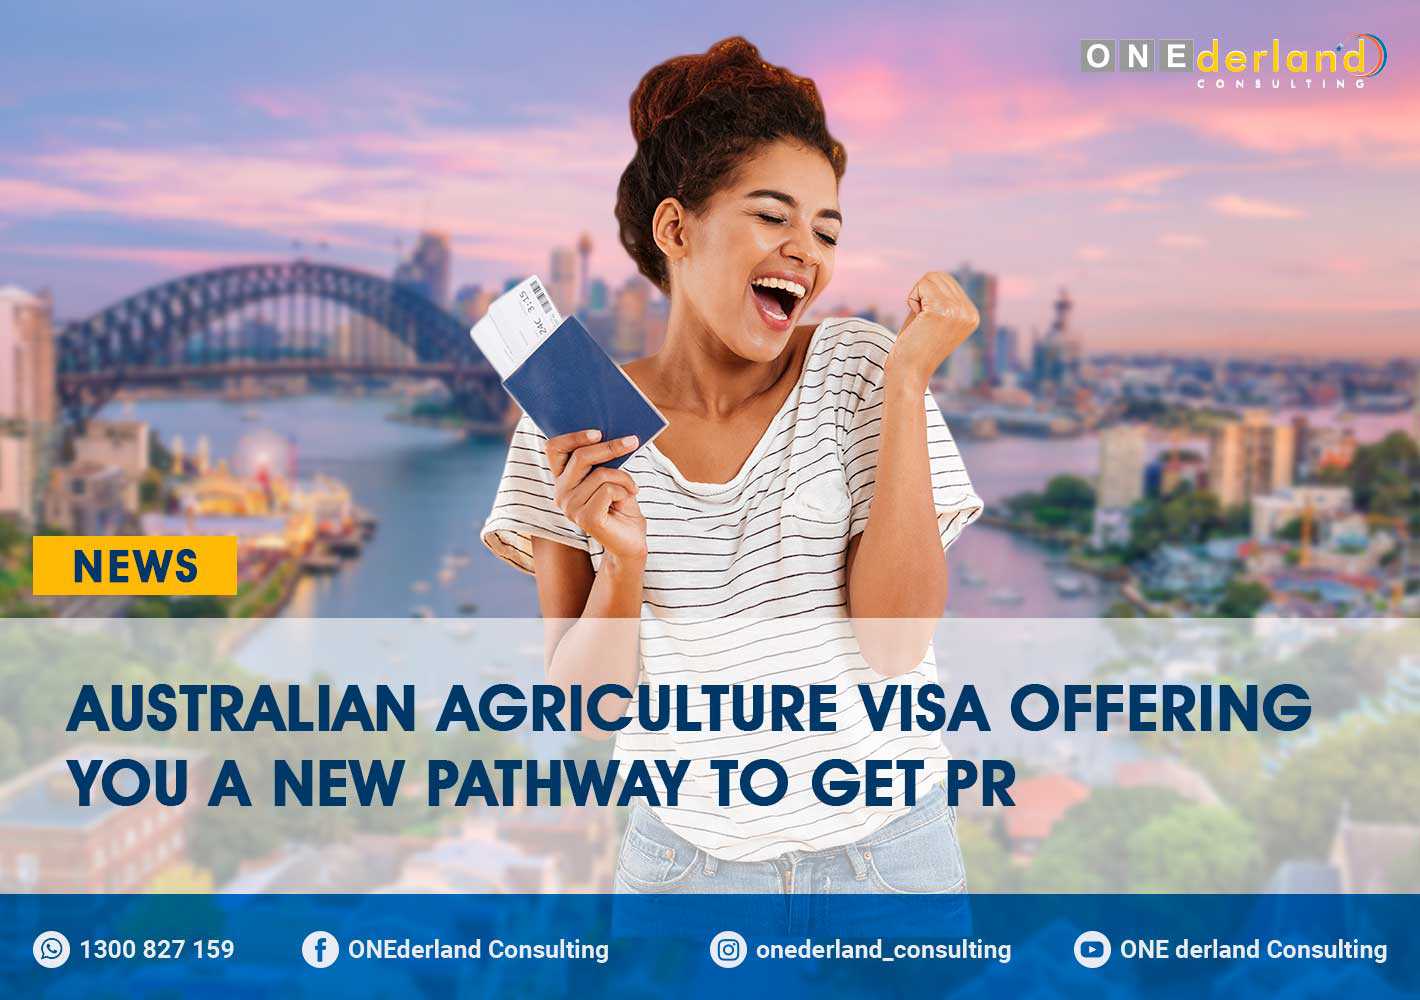 Australian Agriculture Visa offering you a new pathway to get PR